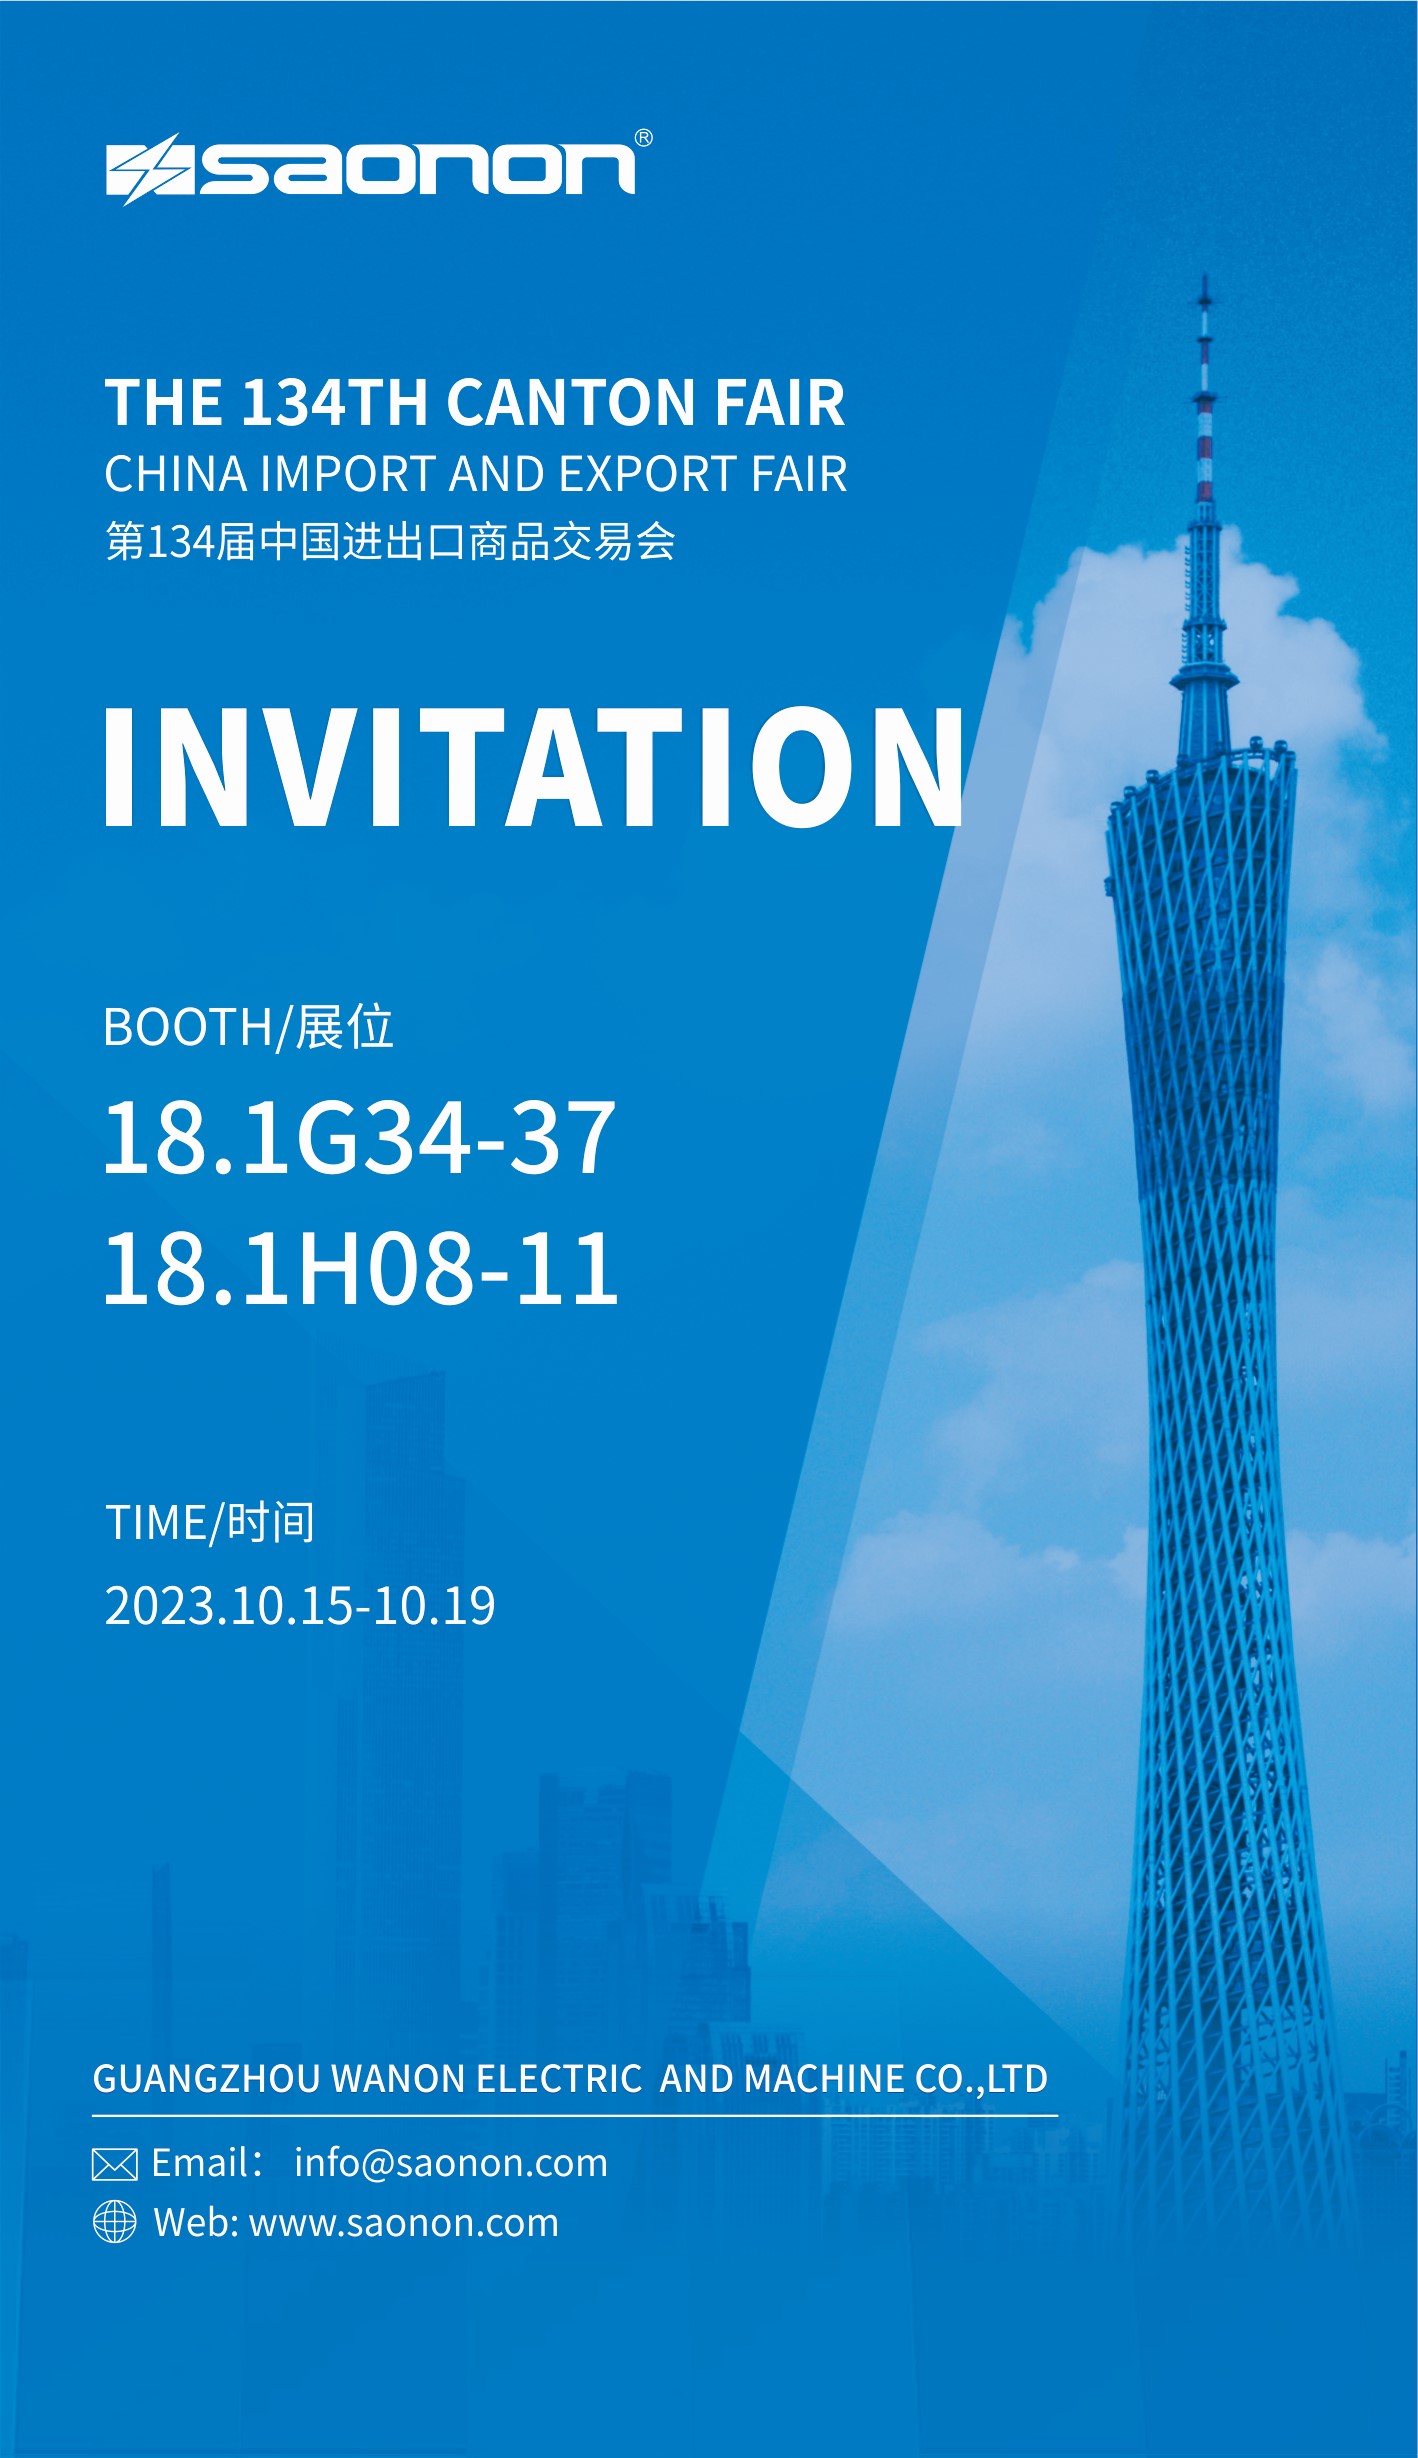 Waiting for you at the 134th Canton Fair